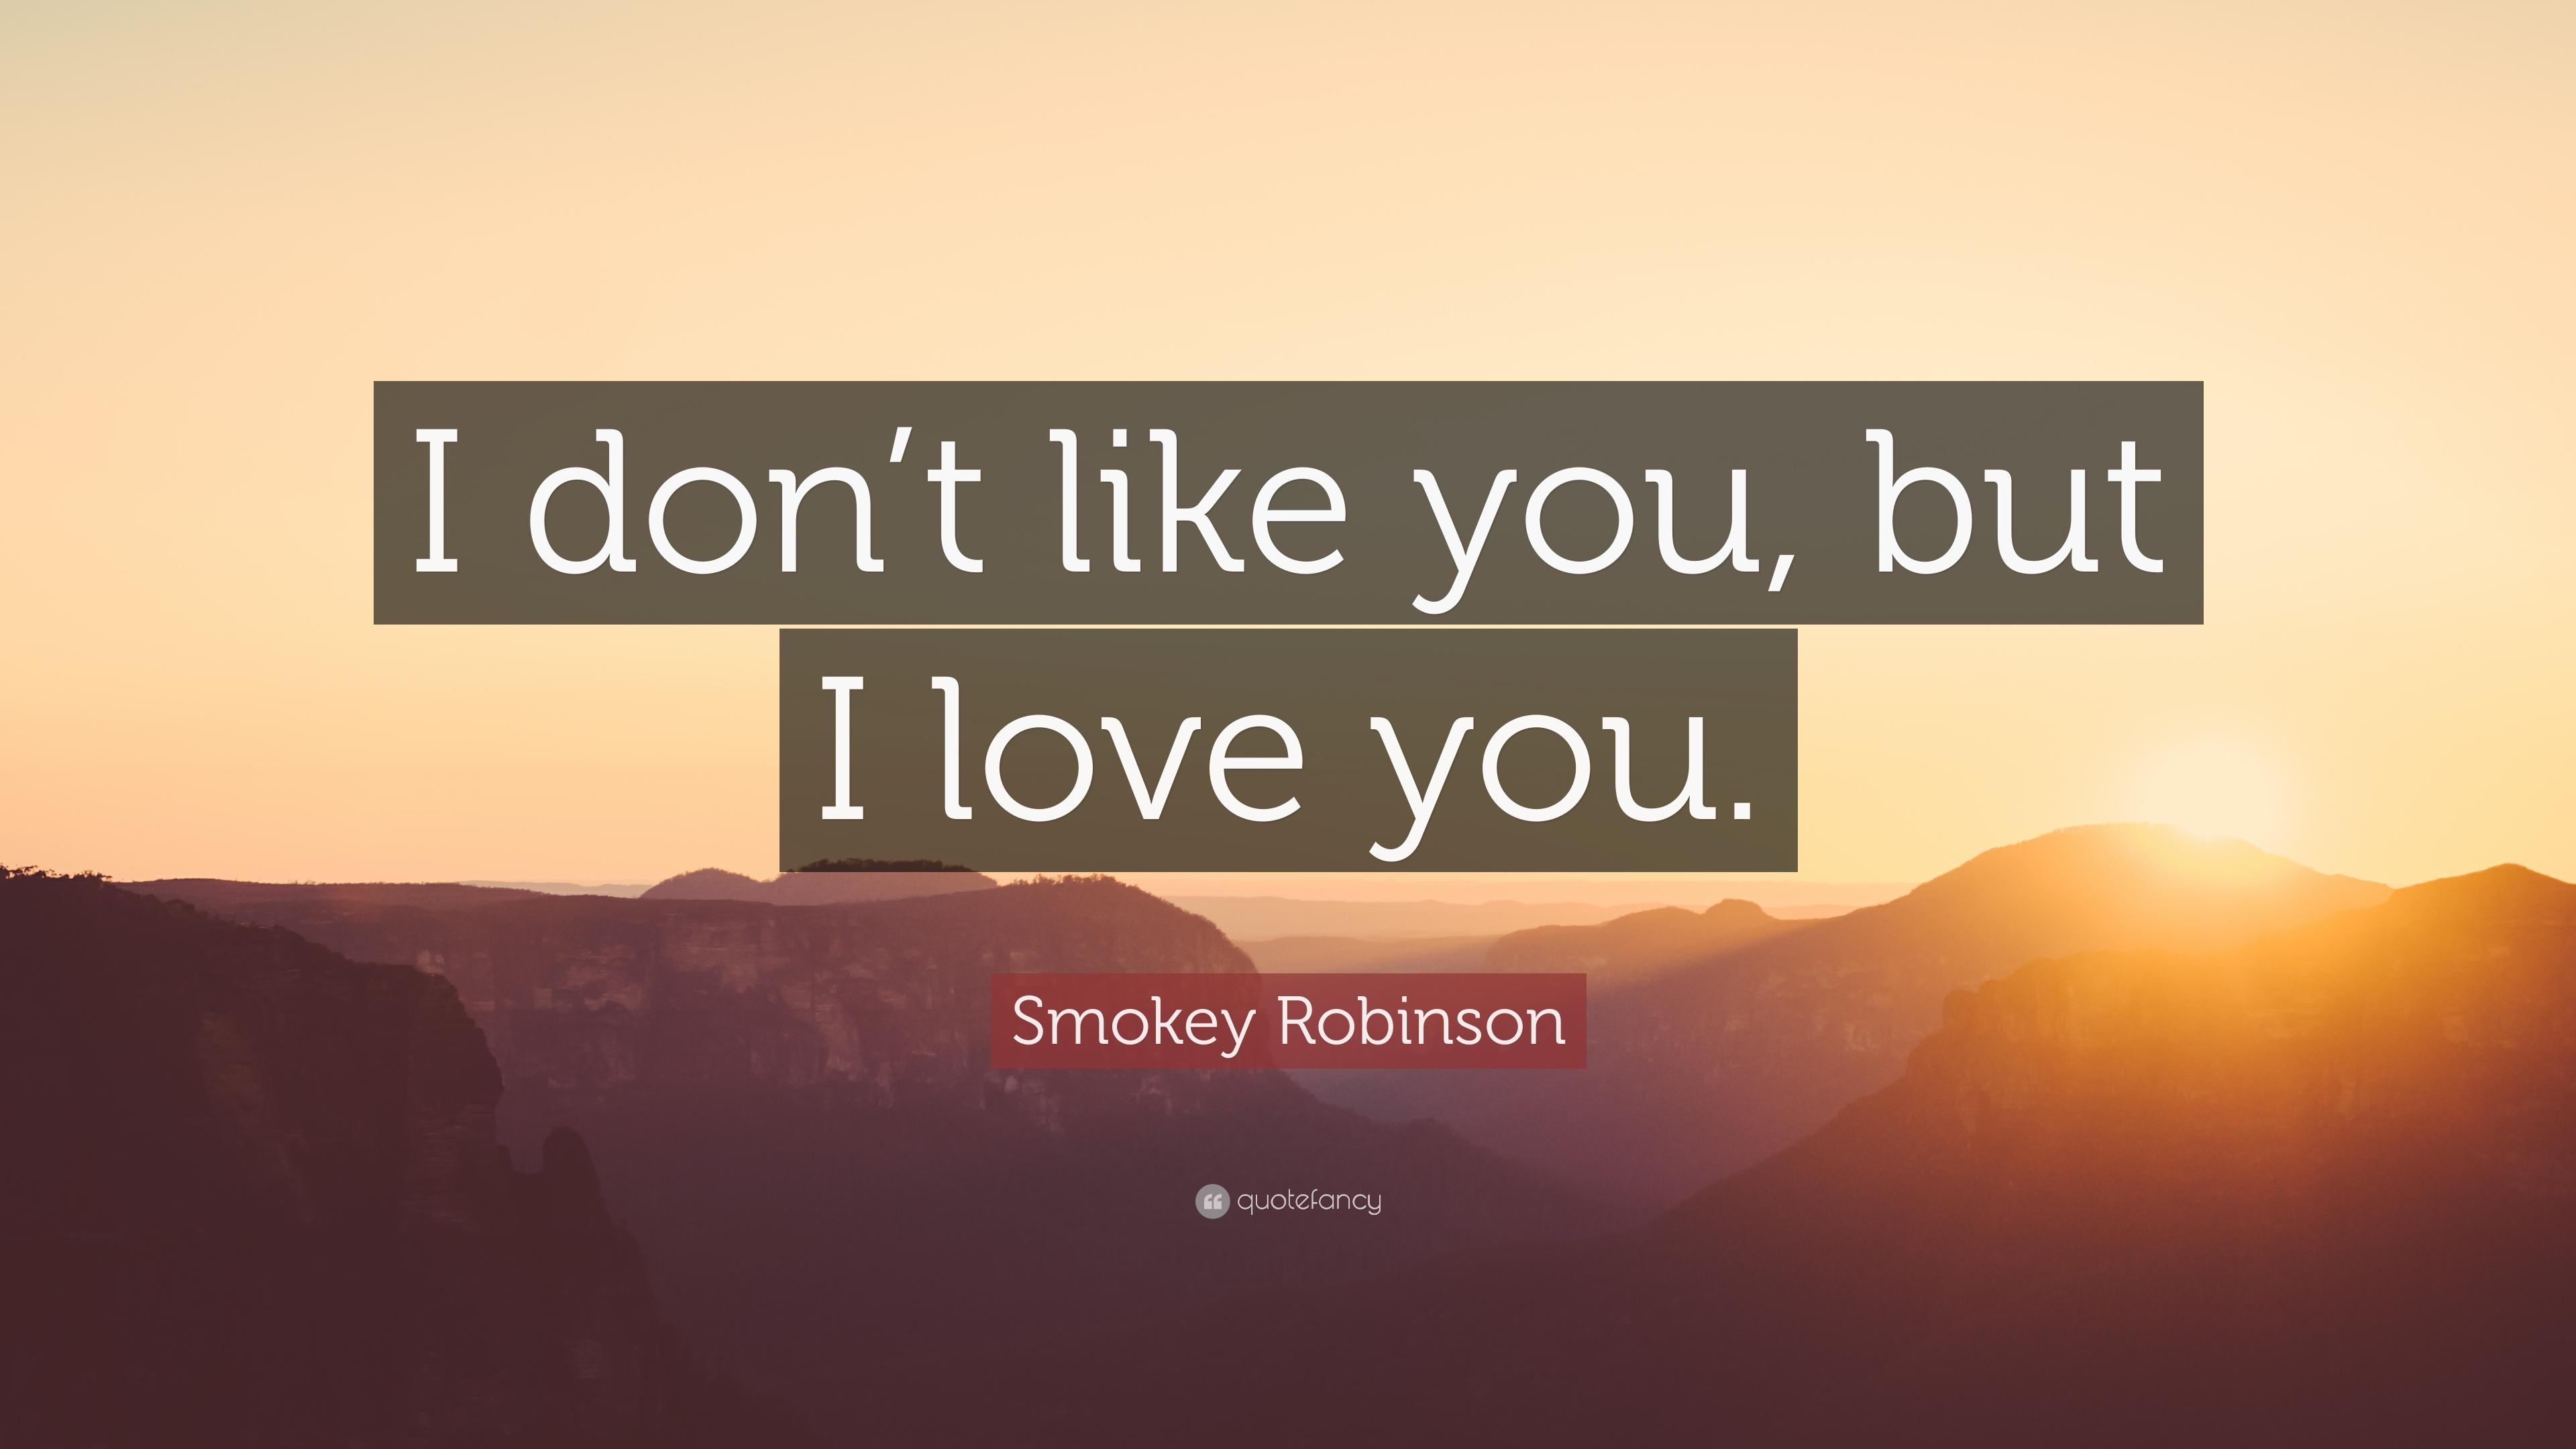 Smokey Robinson Quote: “I don't like you, but I love you.” 7